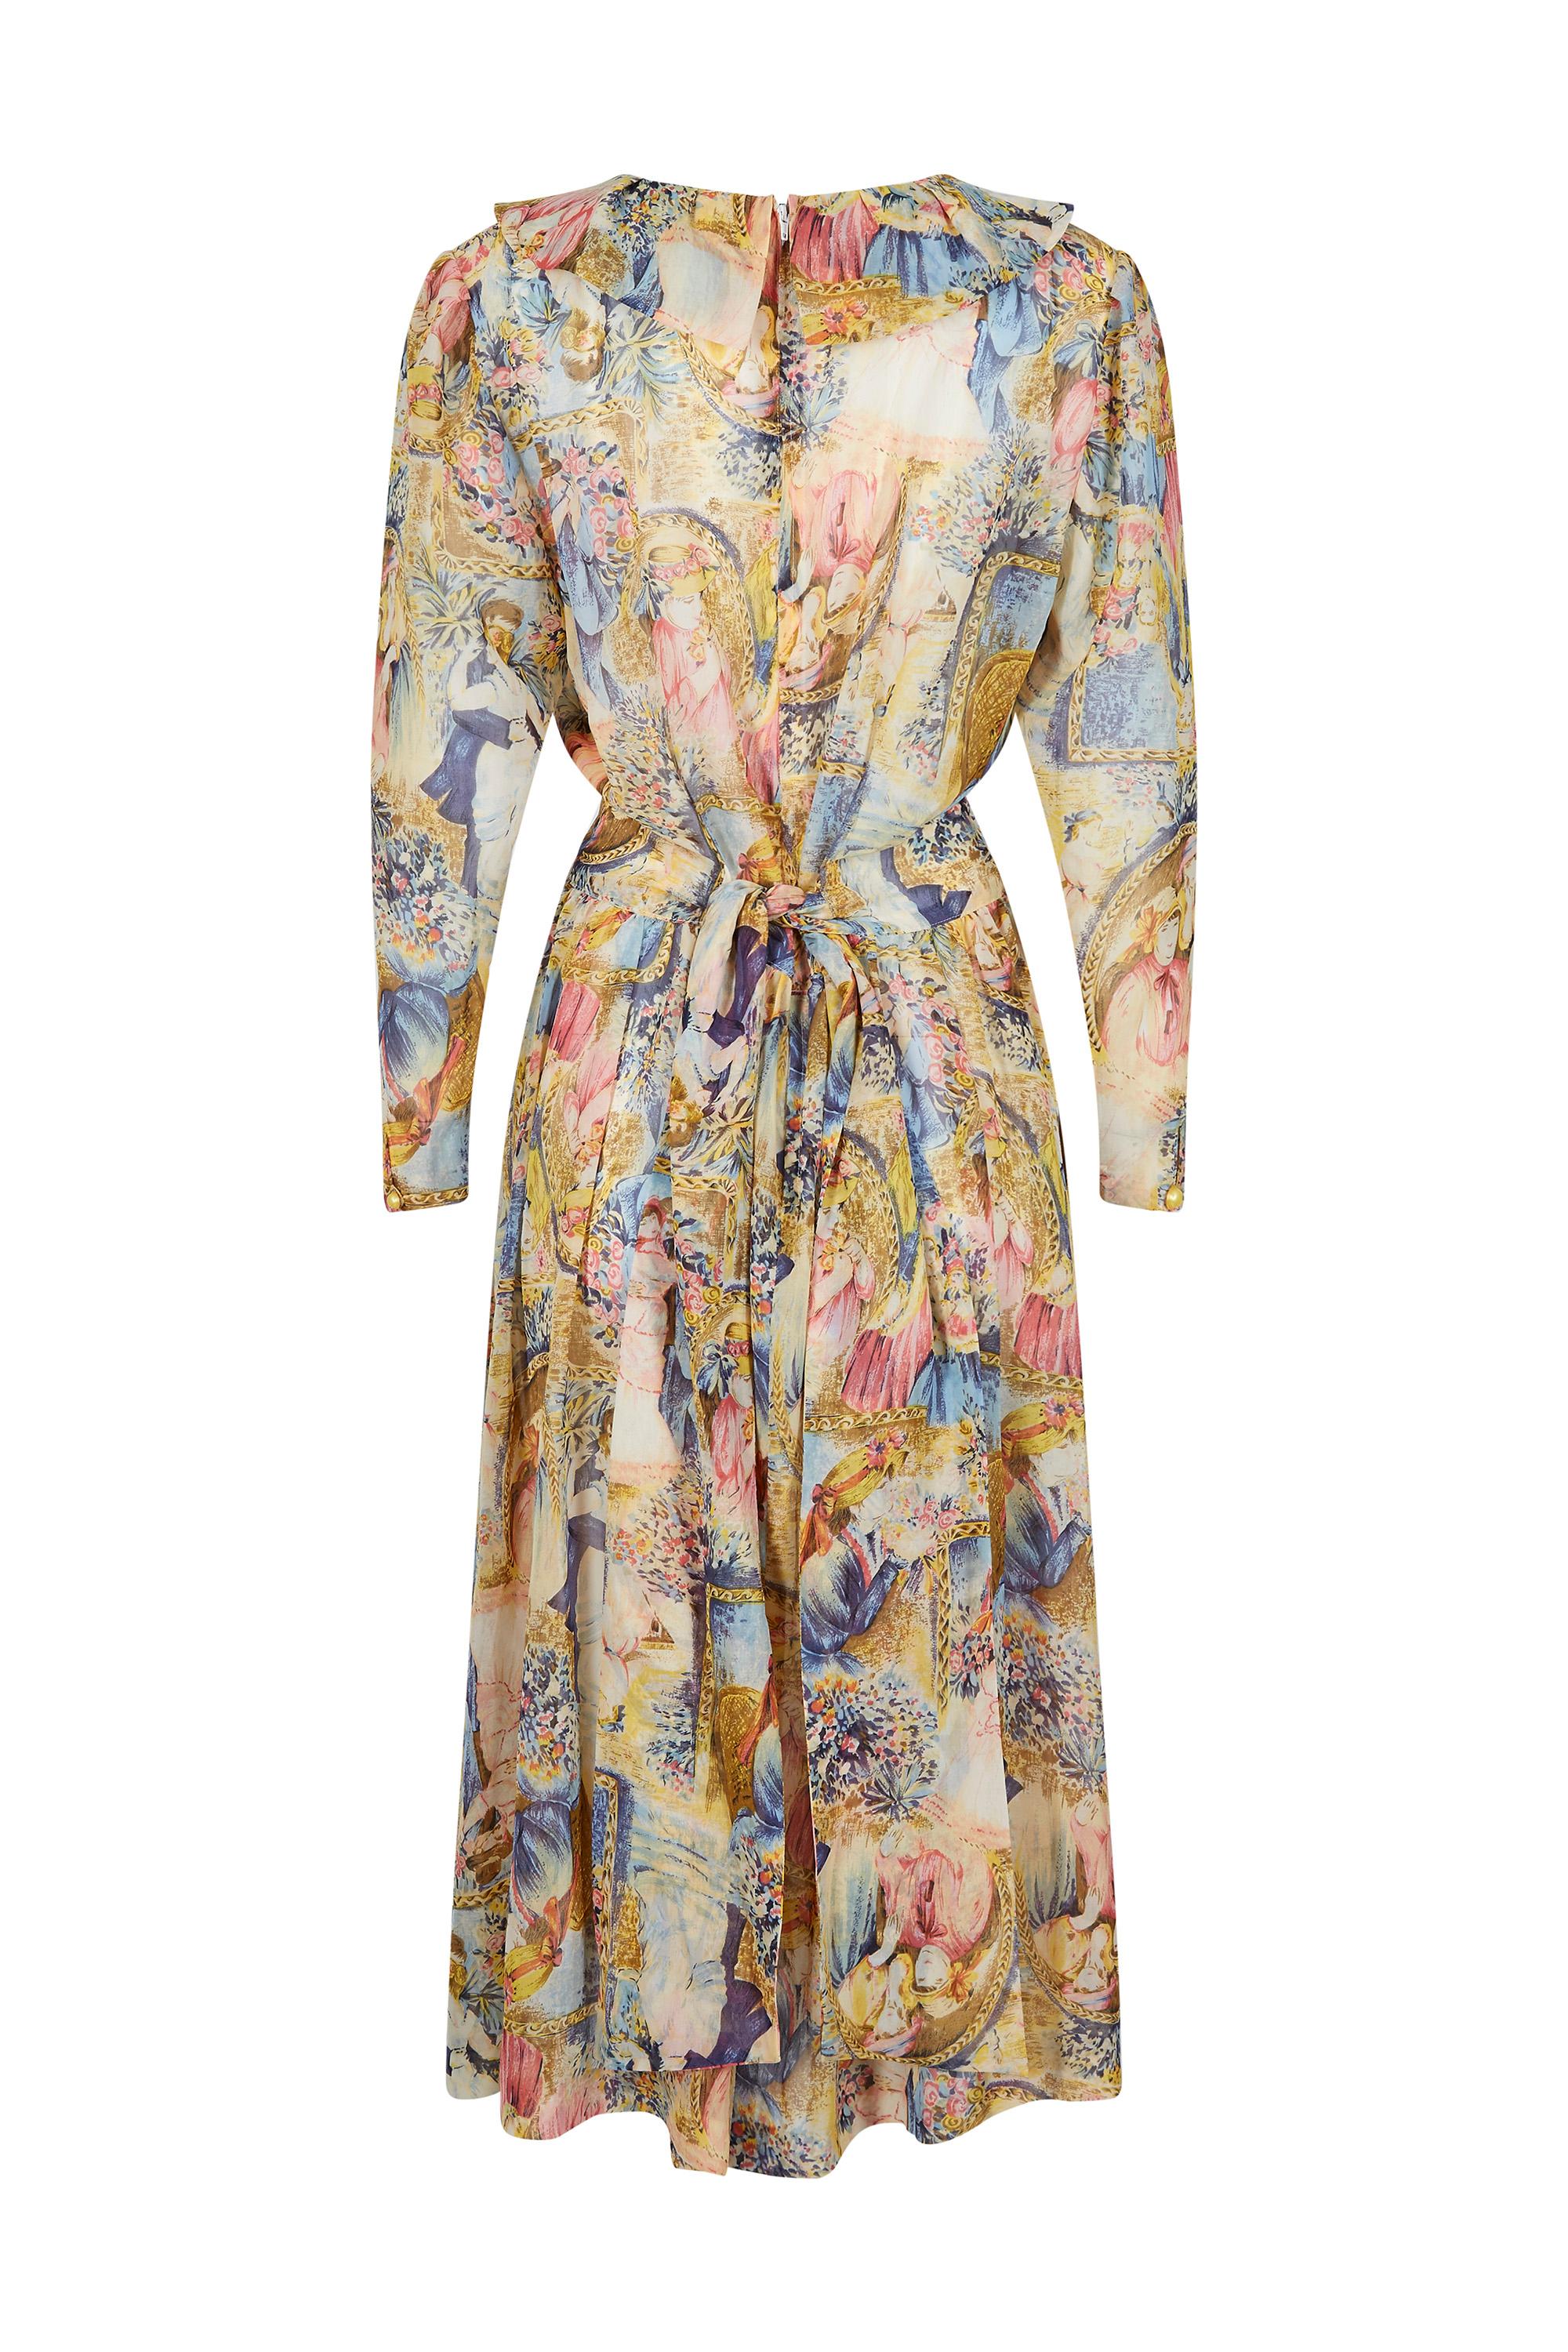 Beige 1970s Novelty Printed Chiffon Pastel Shade Dress With Sash Belt For Sale